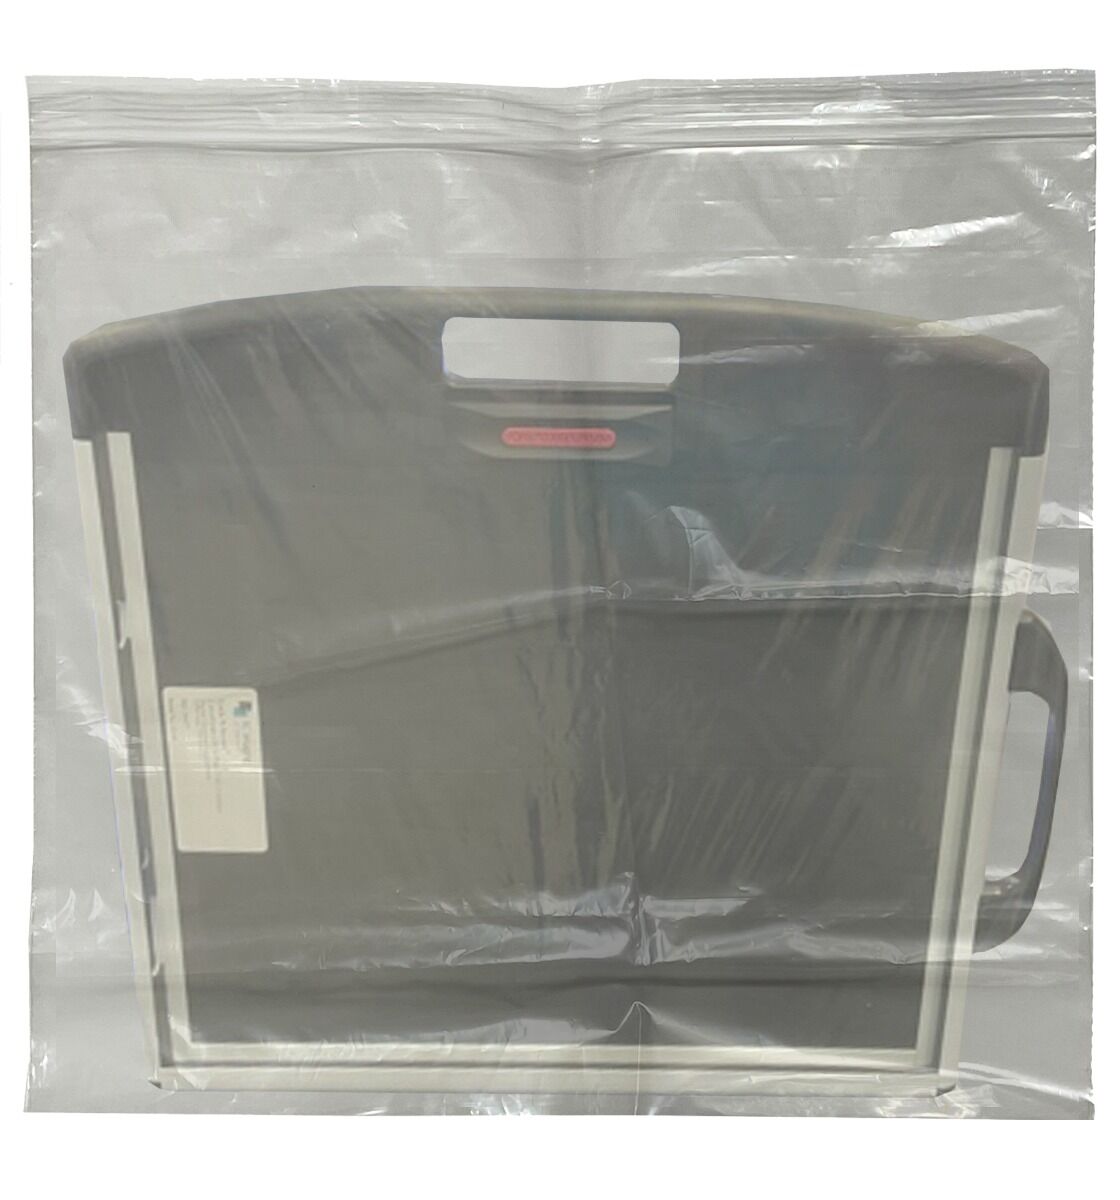 HSG Disposable Urinal Covers